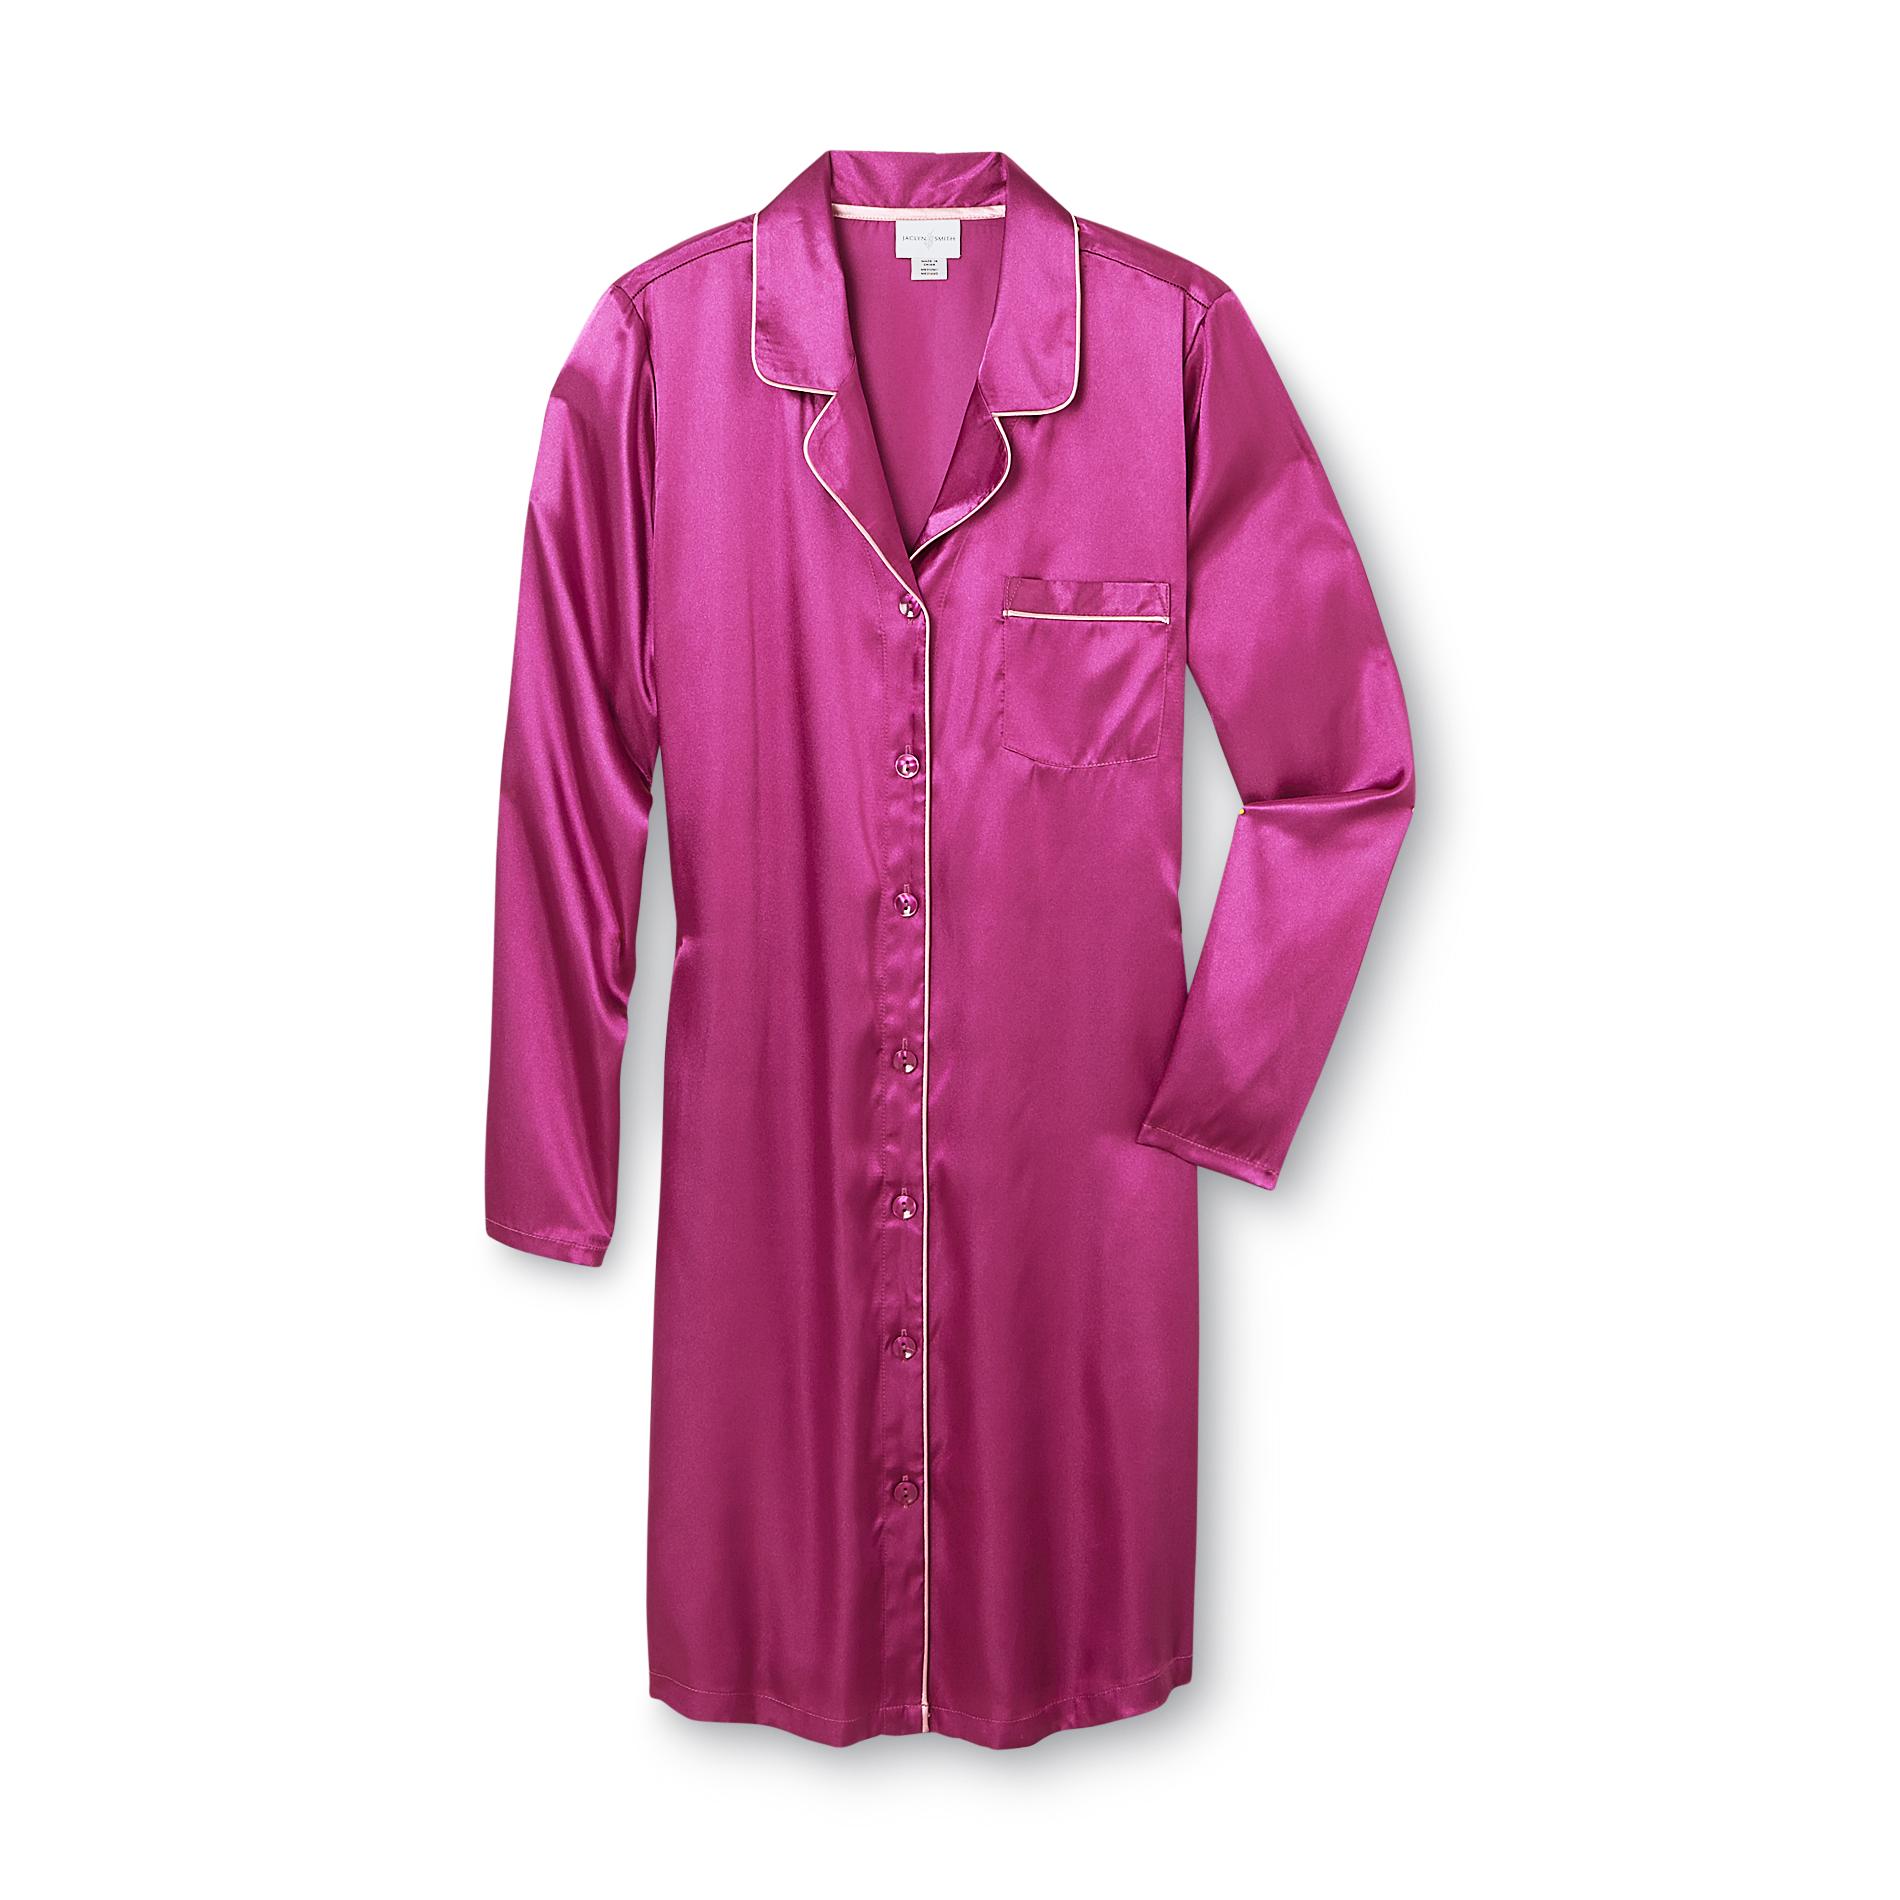 Jaclyn Smith Women's Button-Front Satin Nightgown